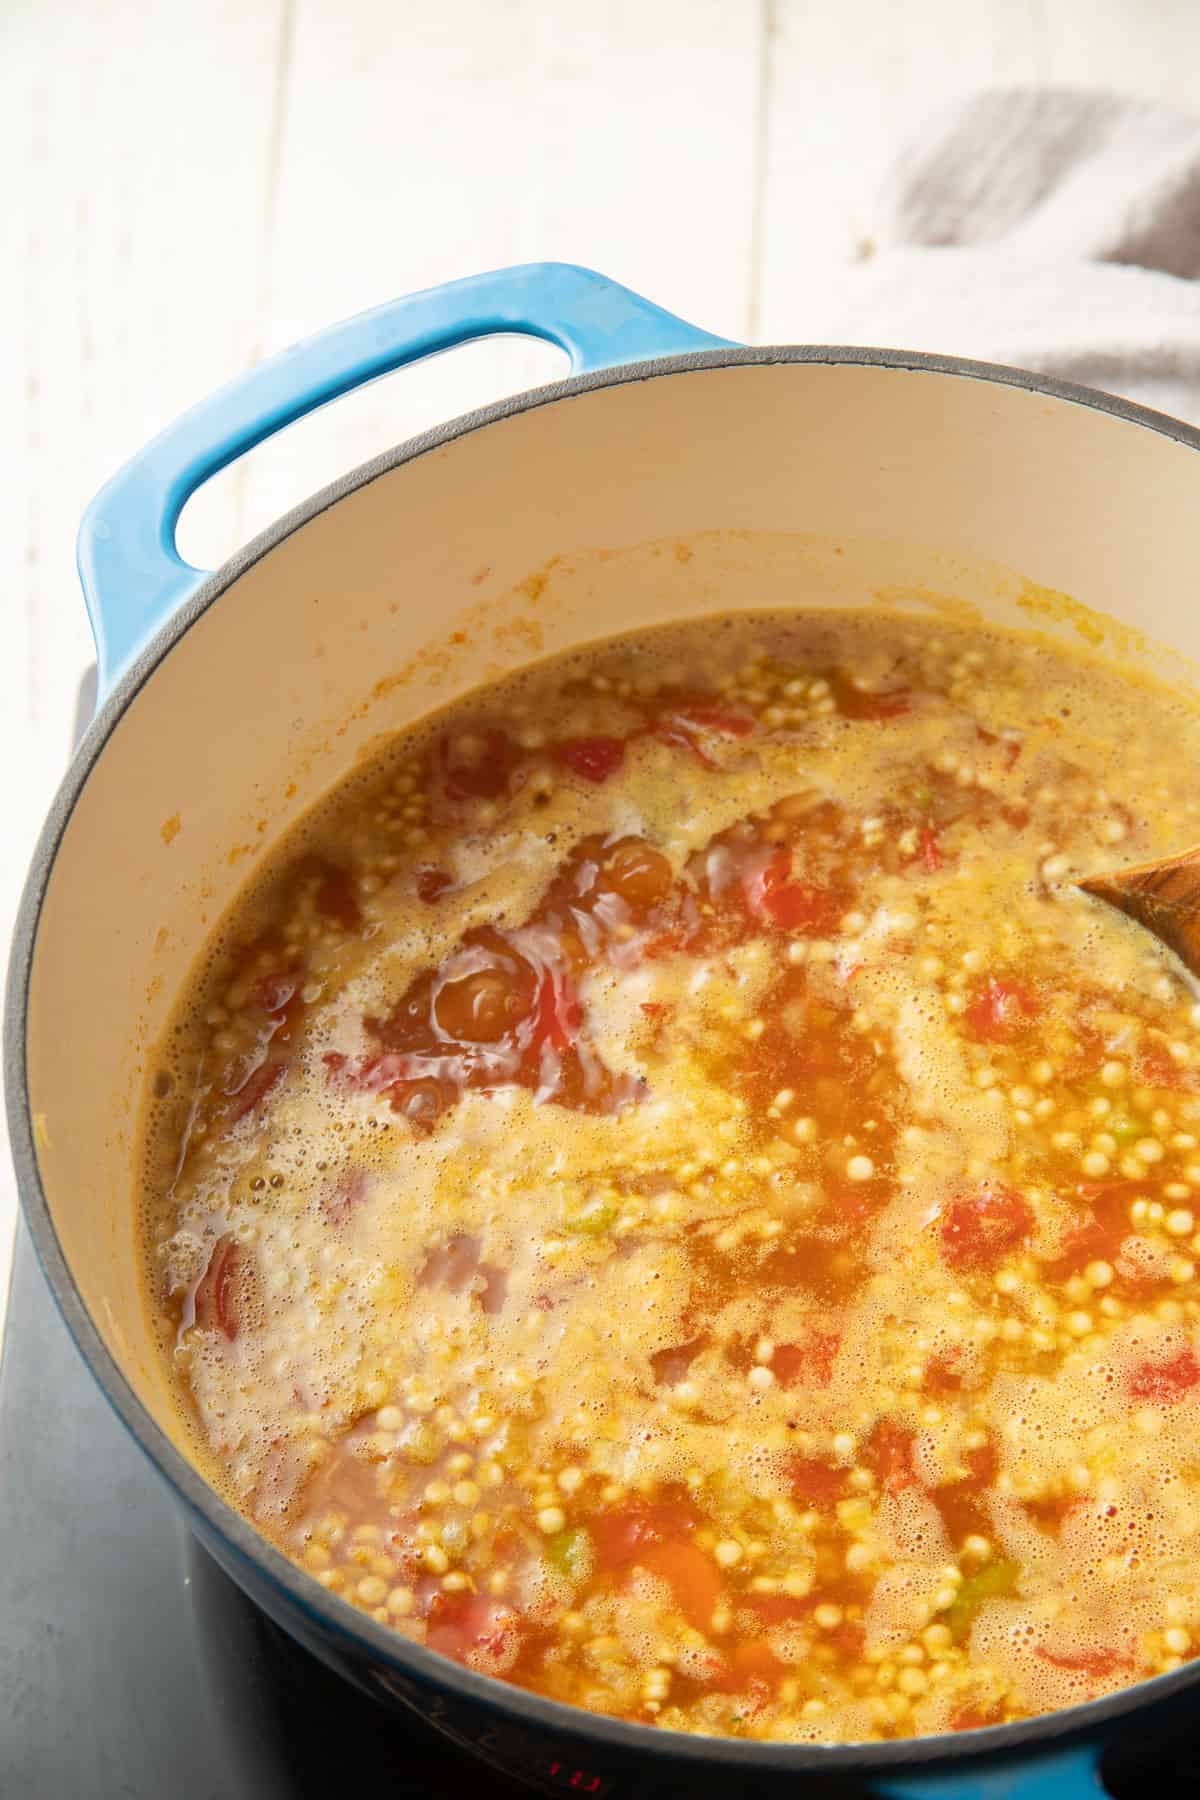 Couscous simmering in a pot with broth, vegetables and tomatoes.